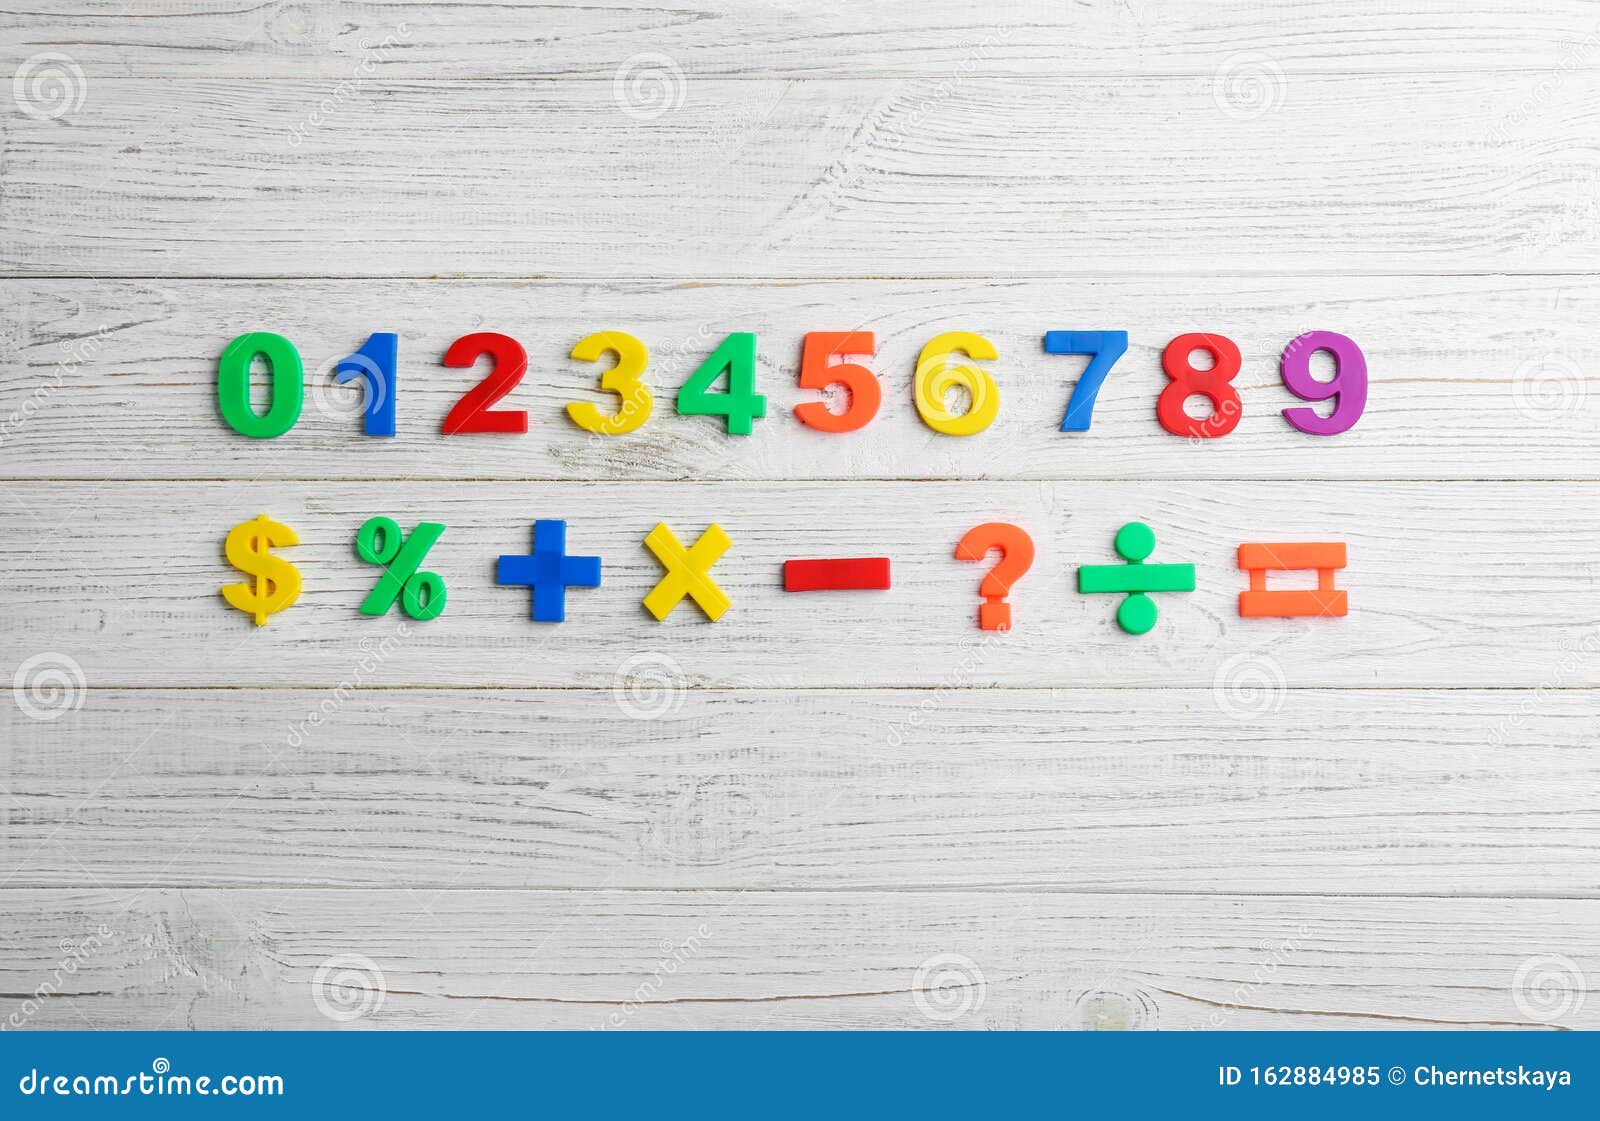 All Wooden Bright and colourful  Magnetic Number & Signs for mathematical skills 